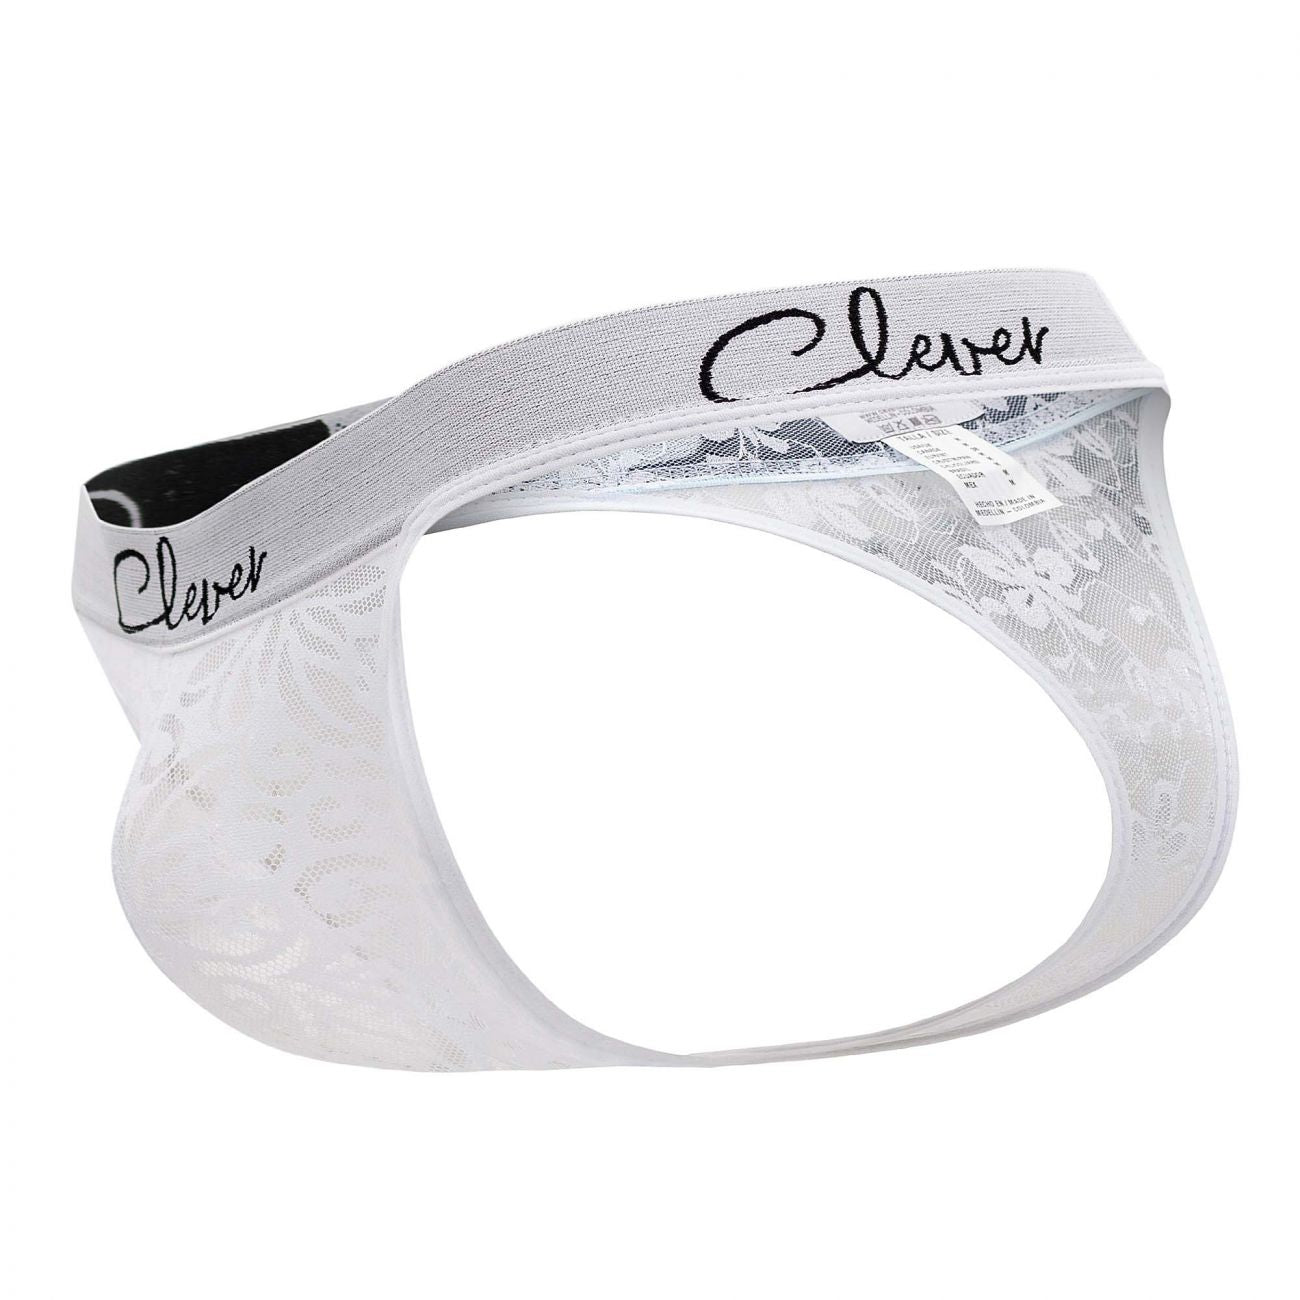 Clever 0603-1 Ideal Thongs White